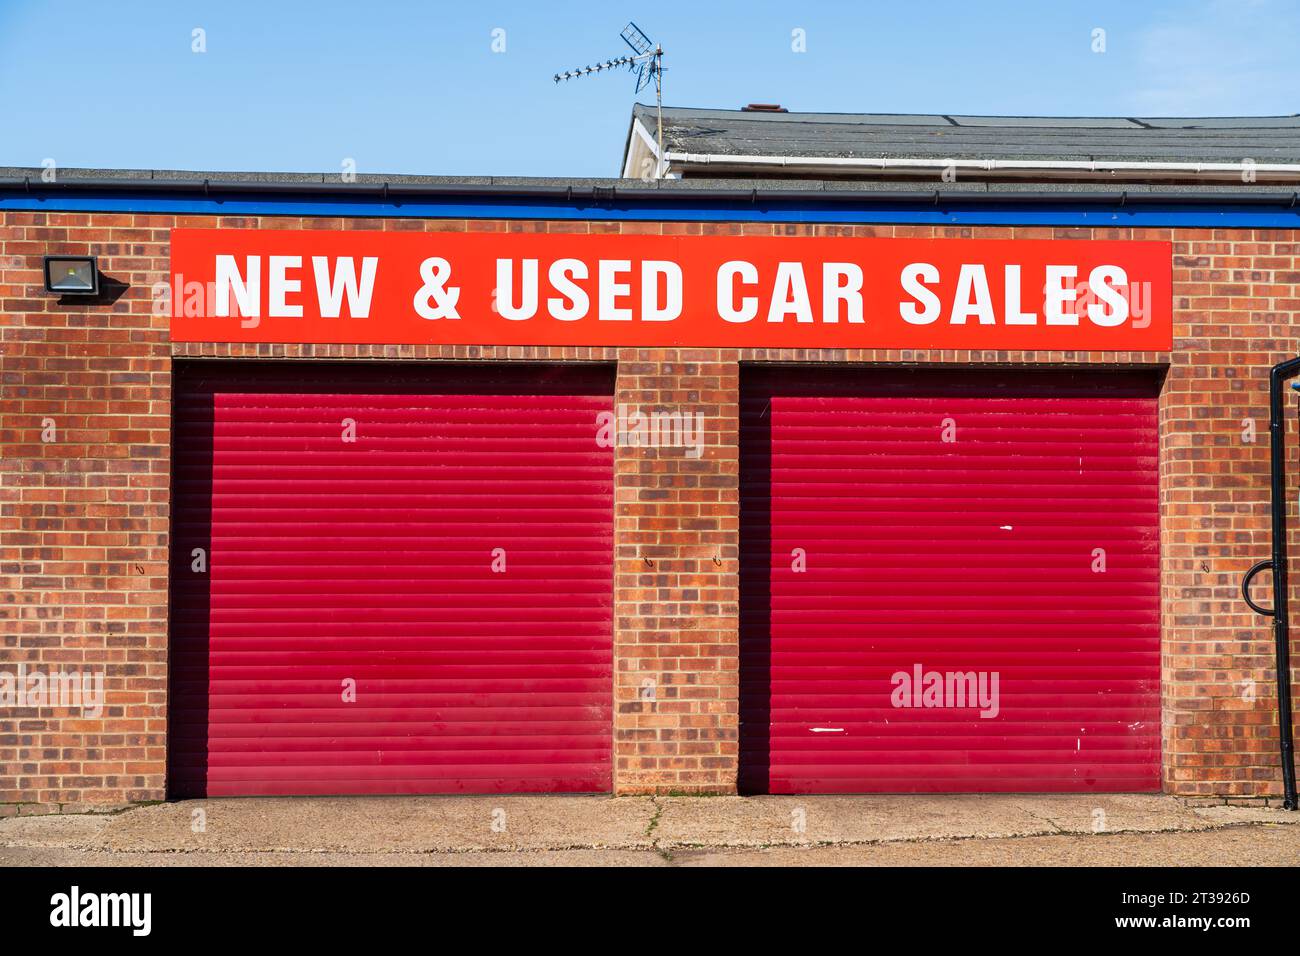 Closed garage doors for a used car sales business Stock Photo